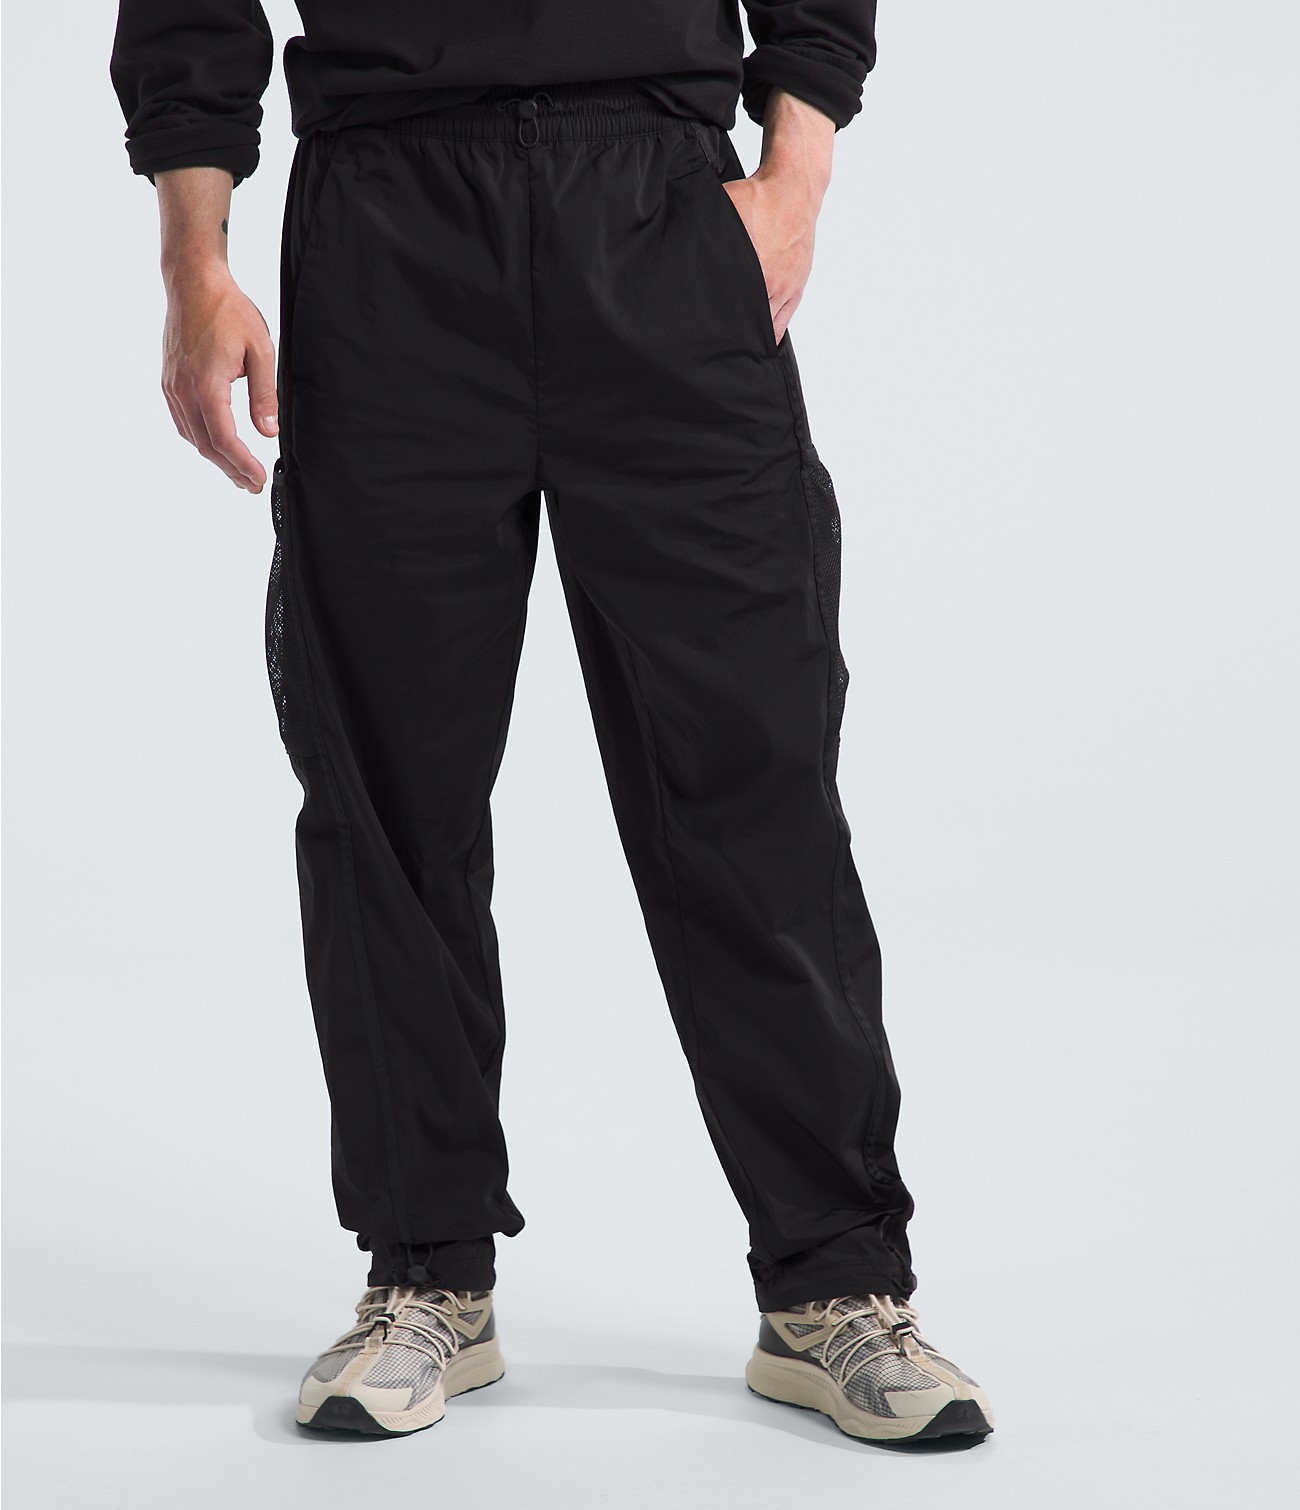 Men’s 2000 Mountain Light Wind Pants | The North Face